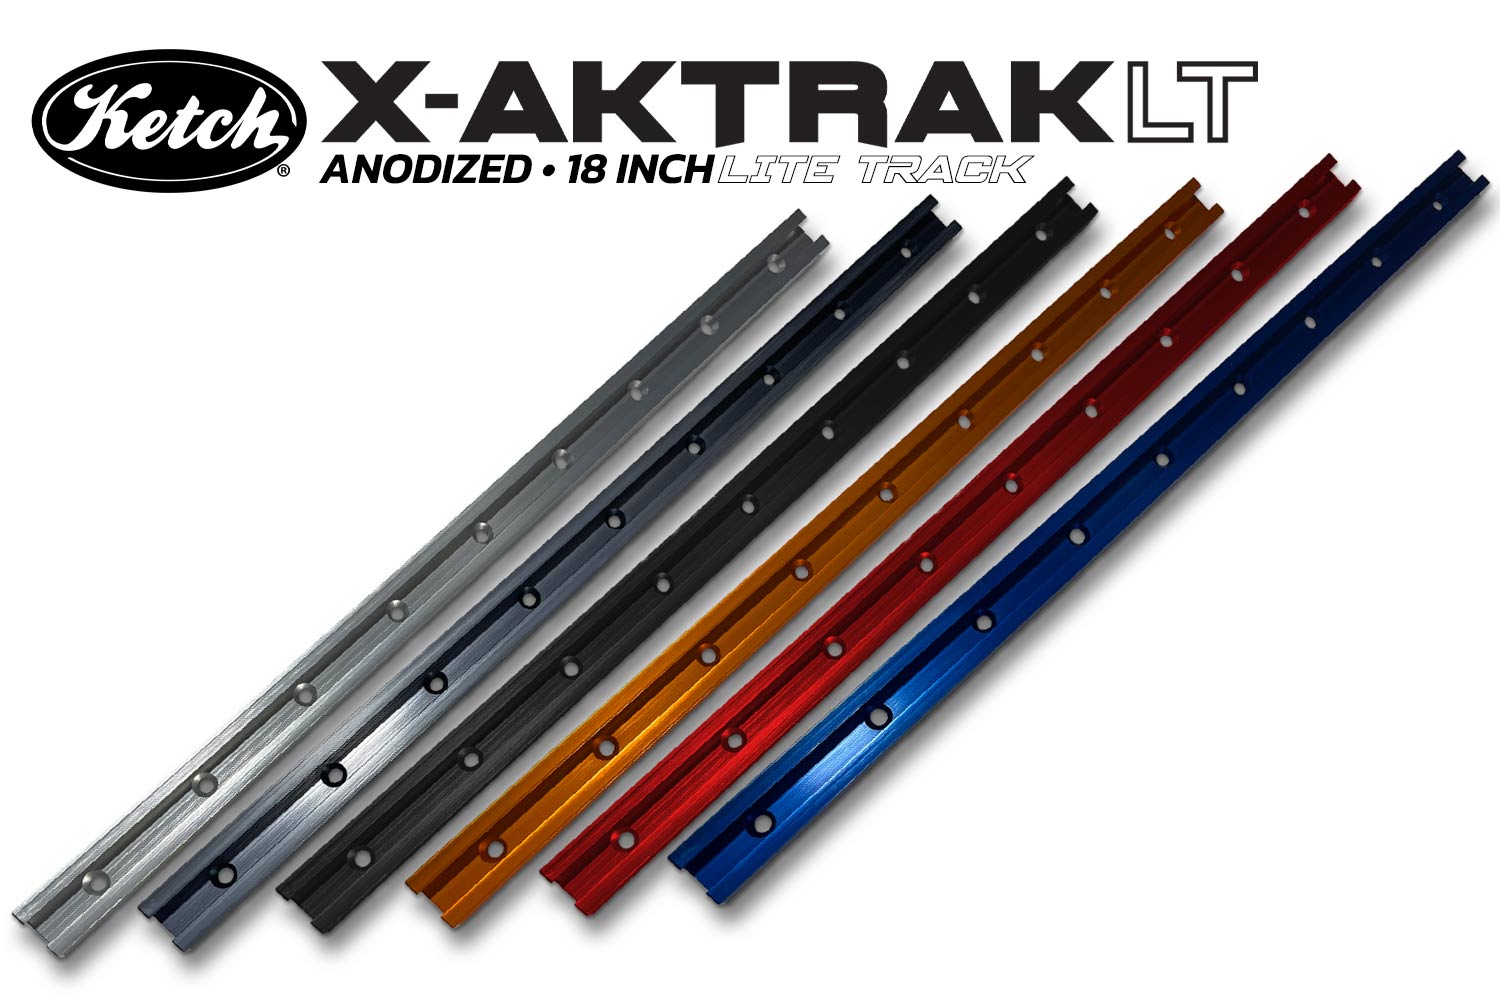 Aluminum anodized 18 inch X-Aktrak lite t-track accessory mounting solution for kayaks and other uses available in 6 colors.